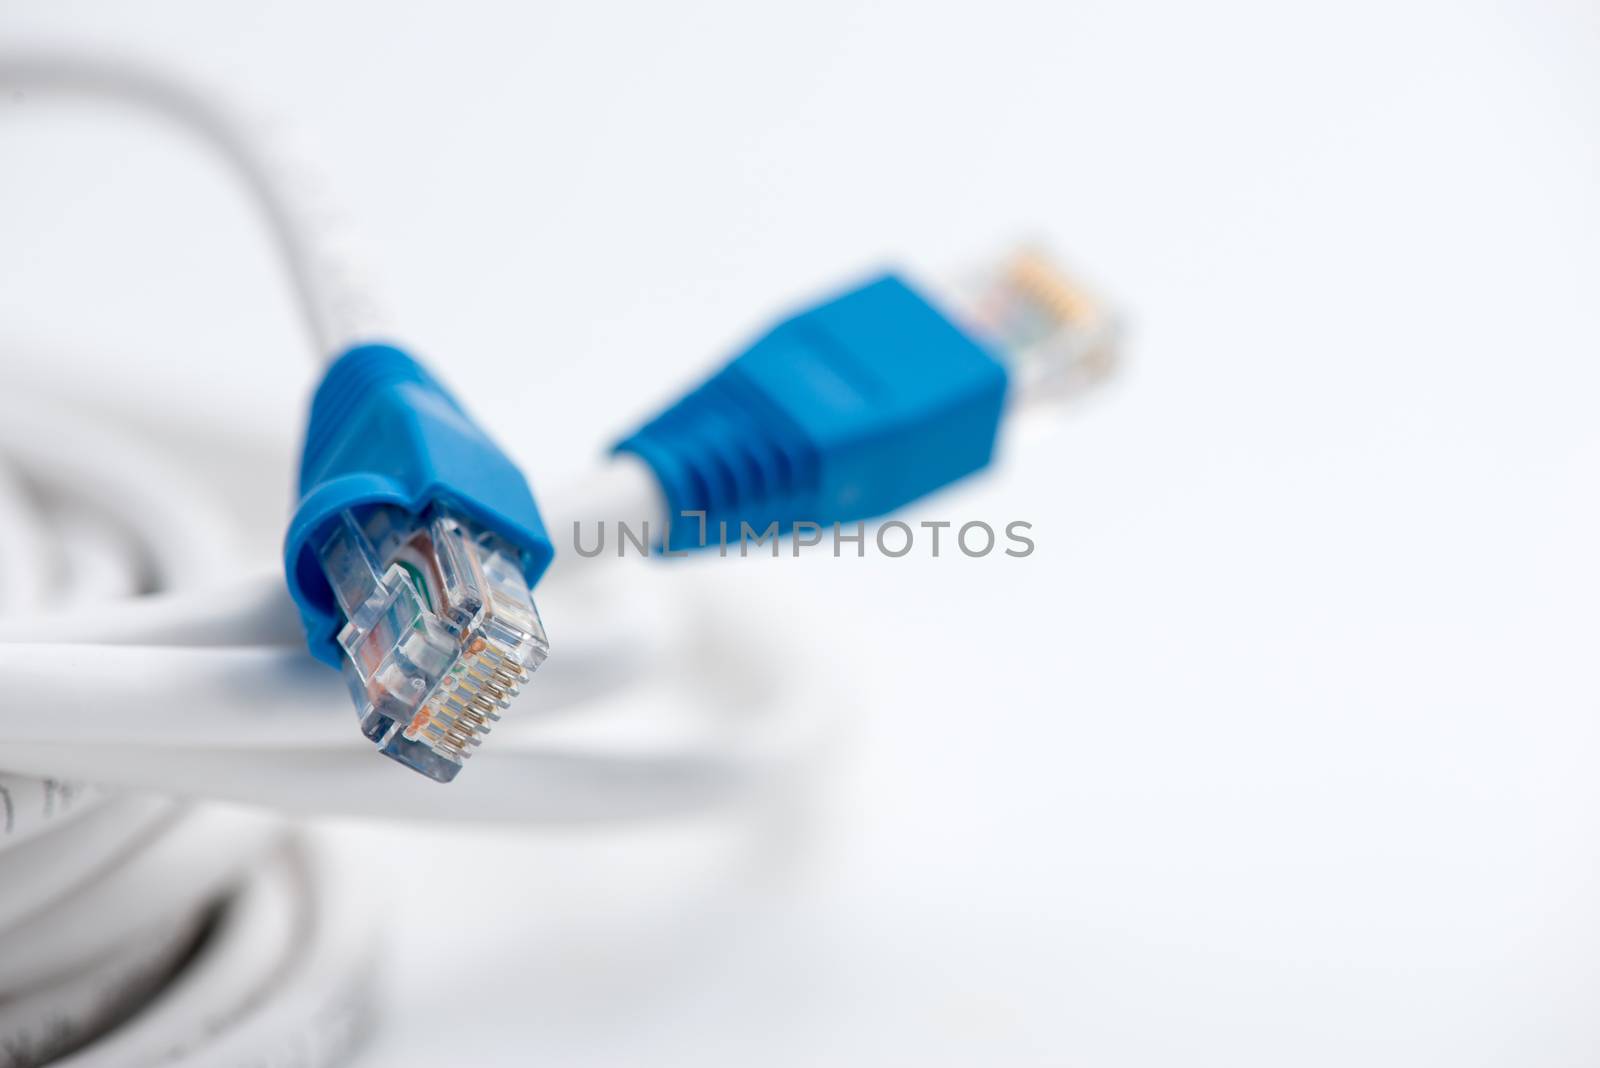 network cable by antpkr